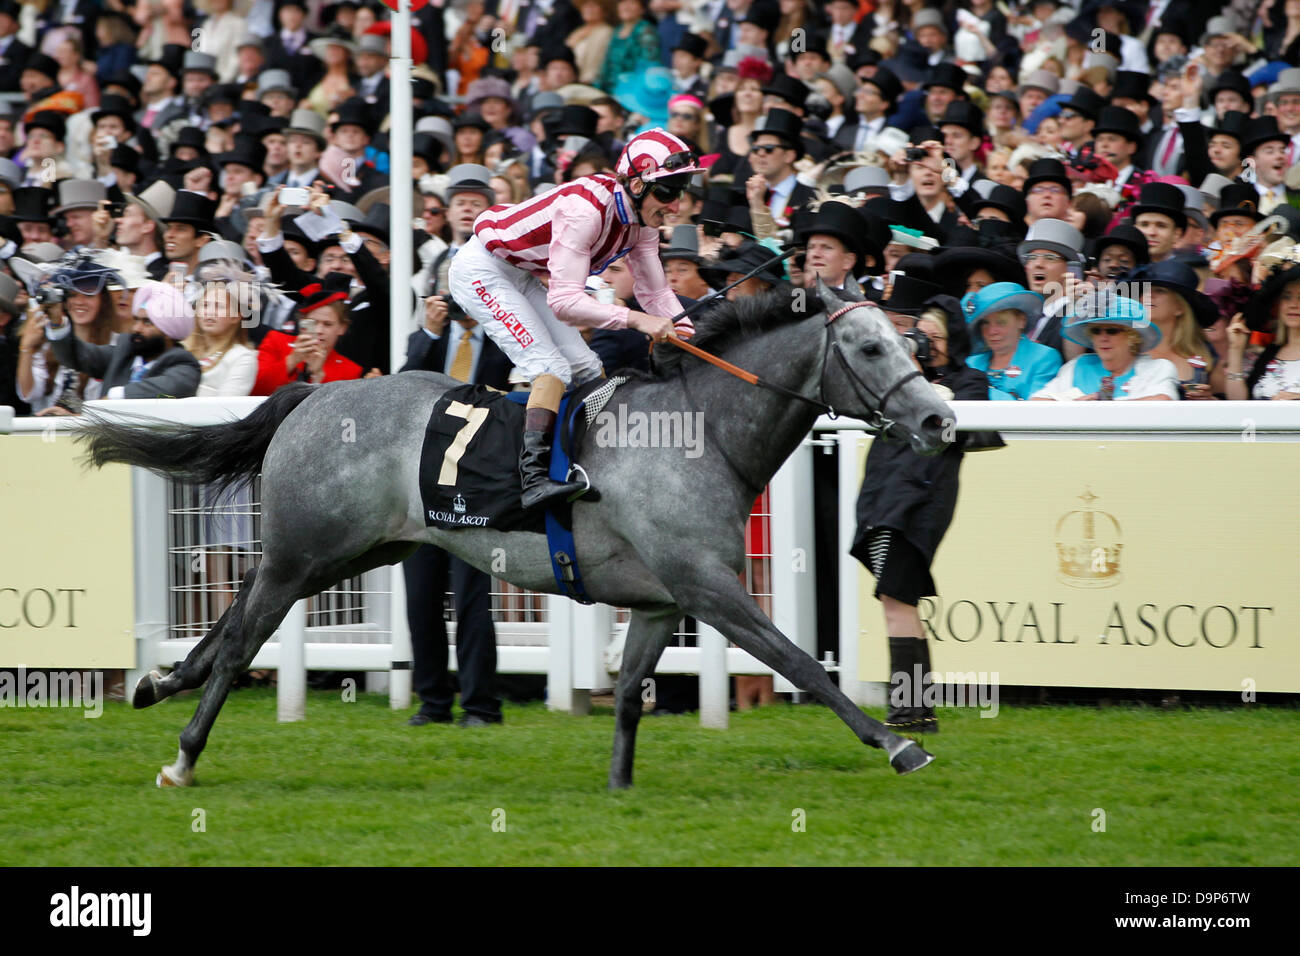 22.06.2013 - Ascot; Lethal Force, ridden by Adam Kirby wins the Diamond Jubilee Stakes (British Champions Series and Global Sprint Challenge) (Group 1). Credit: Lajos-Eric Balogh/turfstock.com Stock Photo